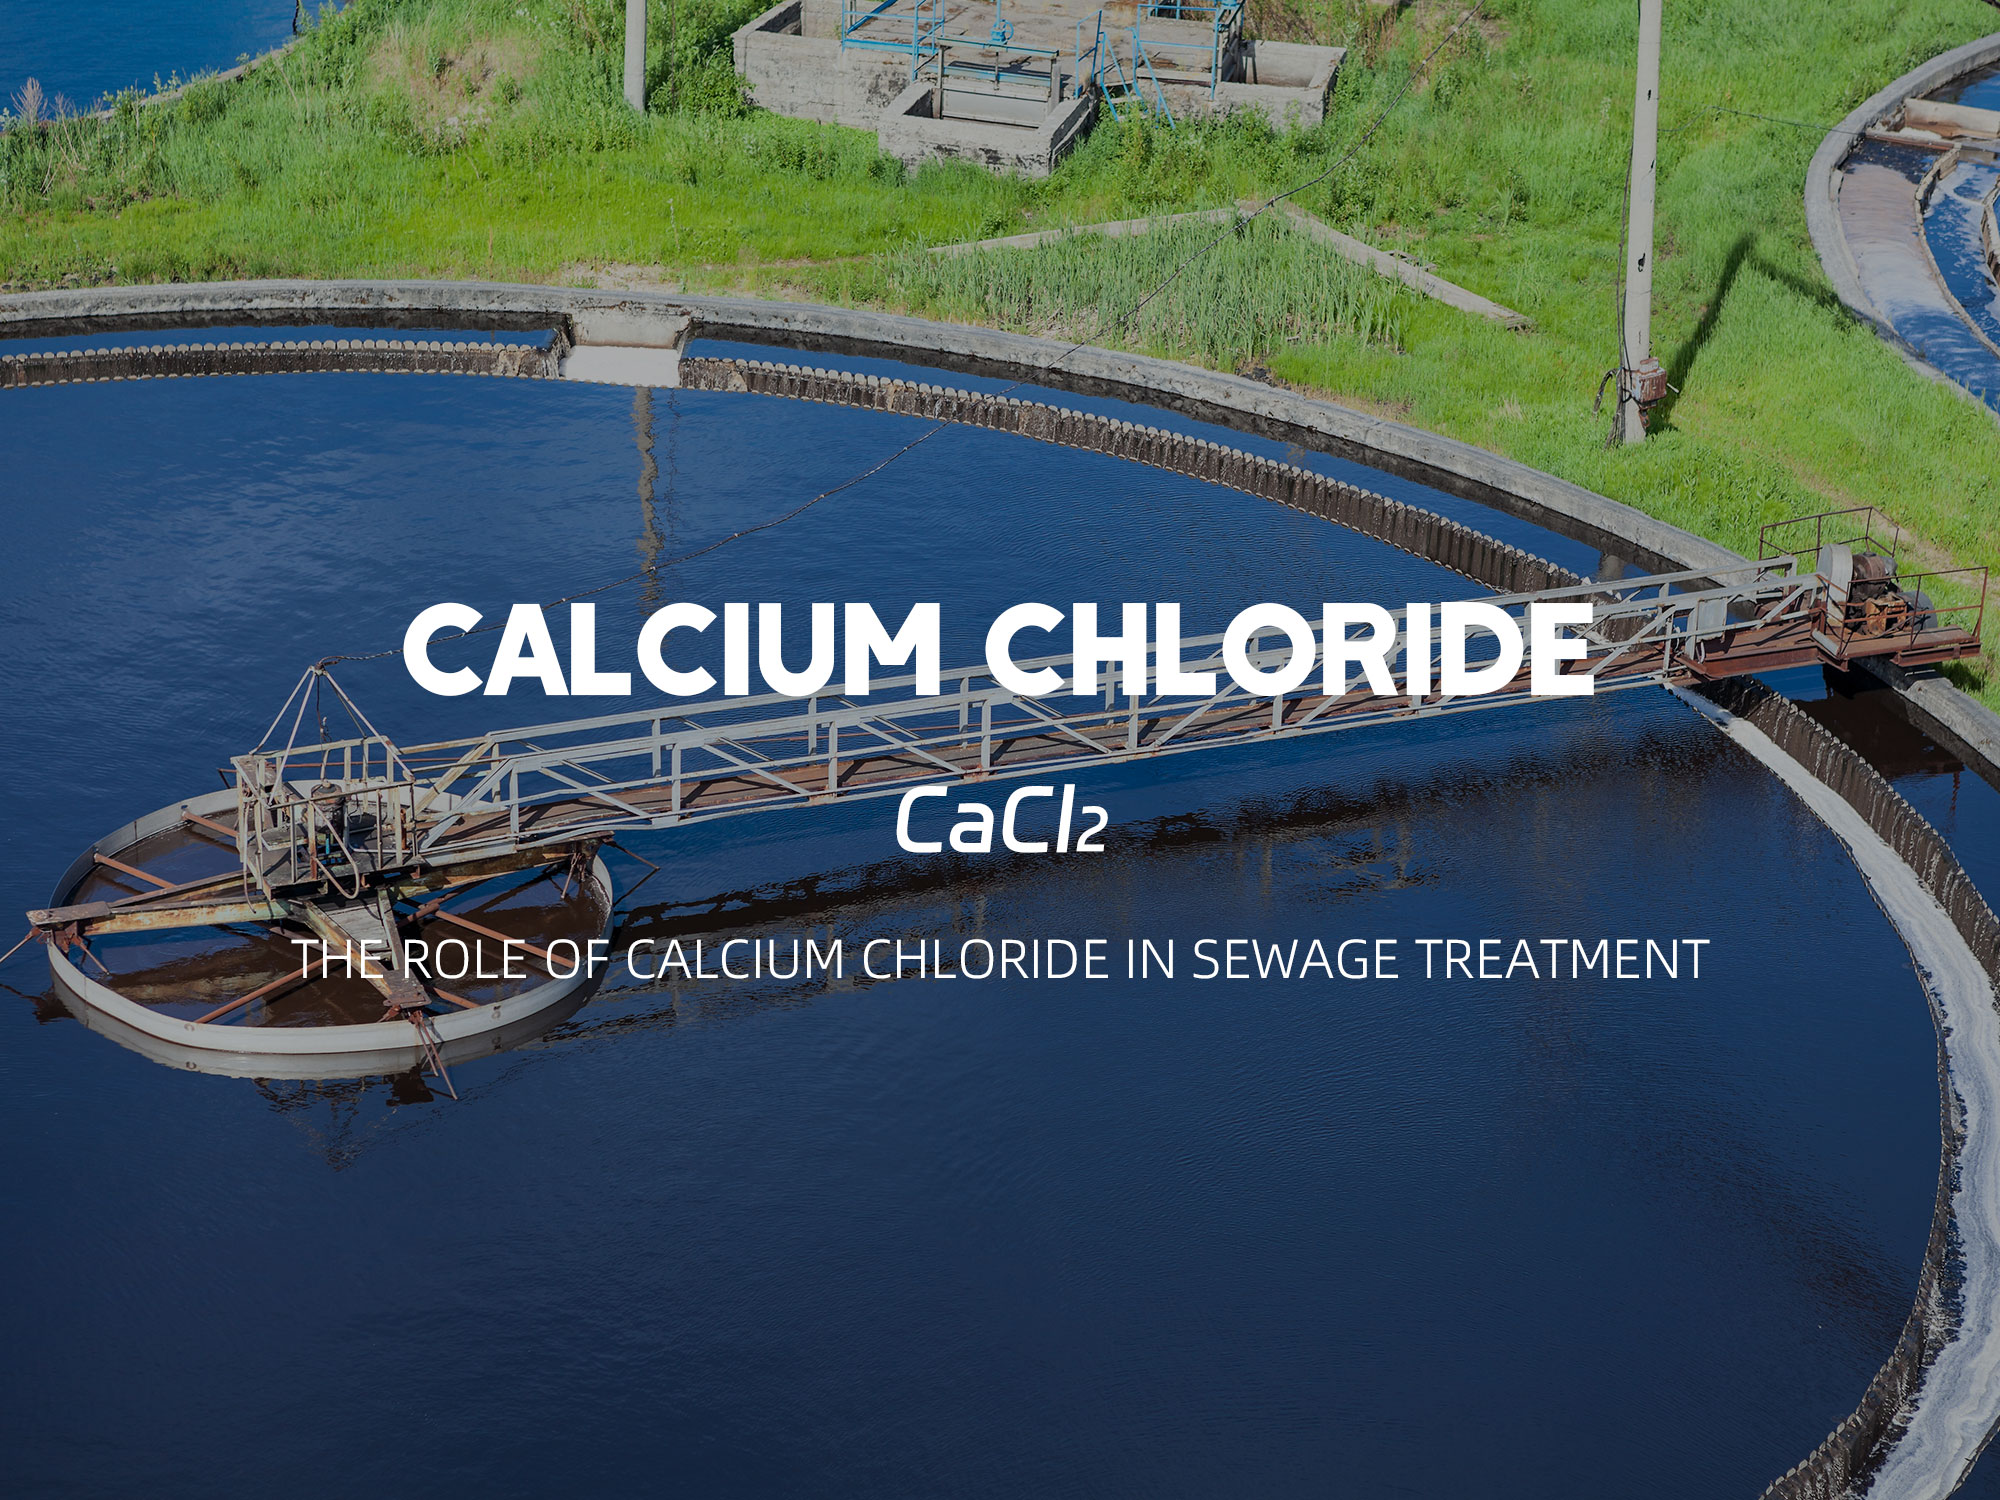 The role of calcium chloride in sewage treatment